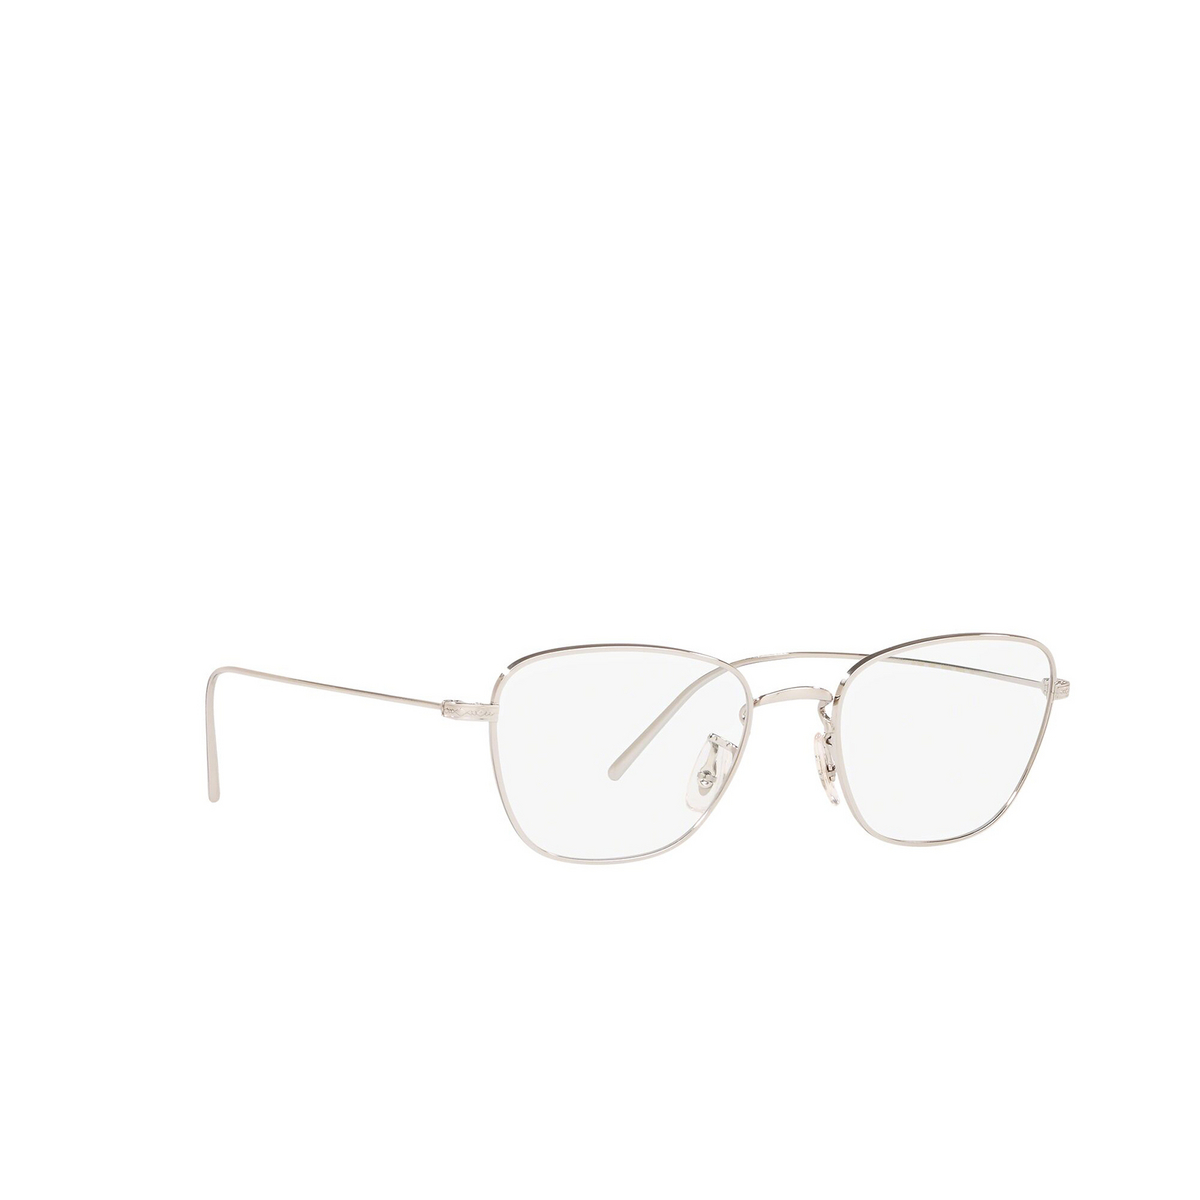 Oliver Peoples® Butterfly Eyeglasses: Suliane OV1254 color Silver 5036 - 2/3.